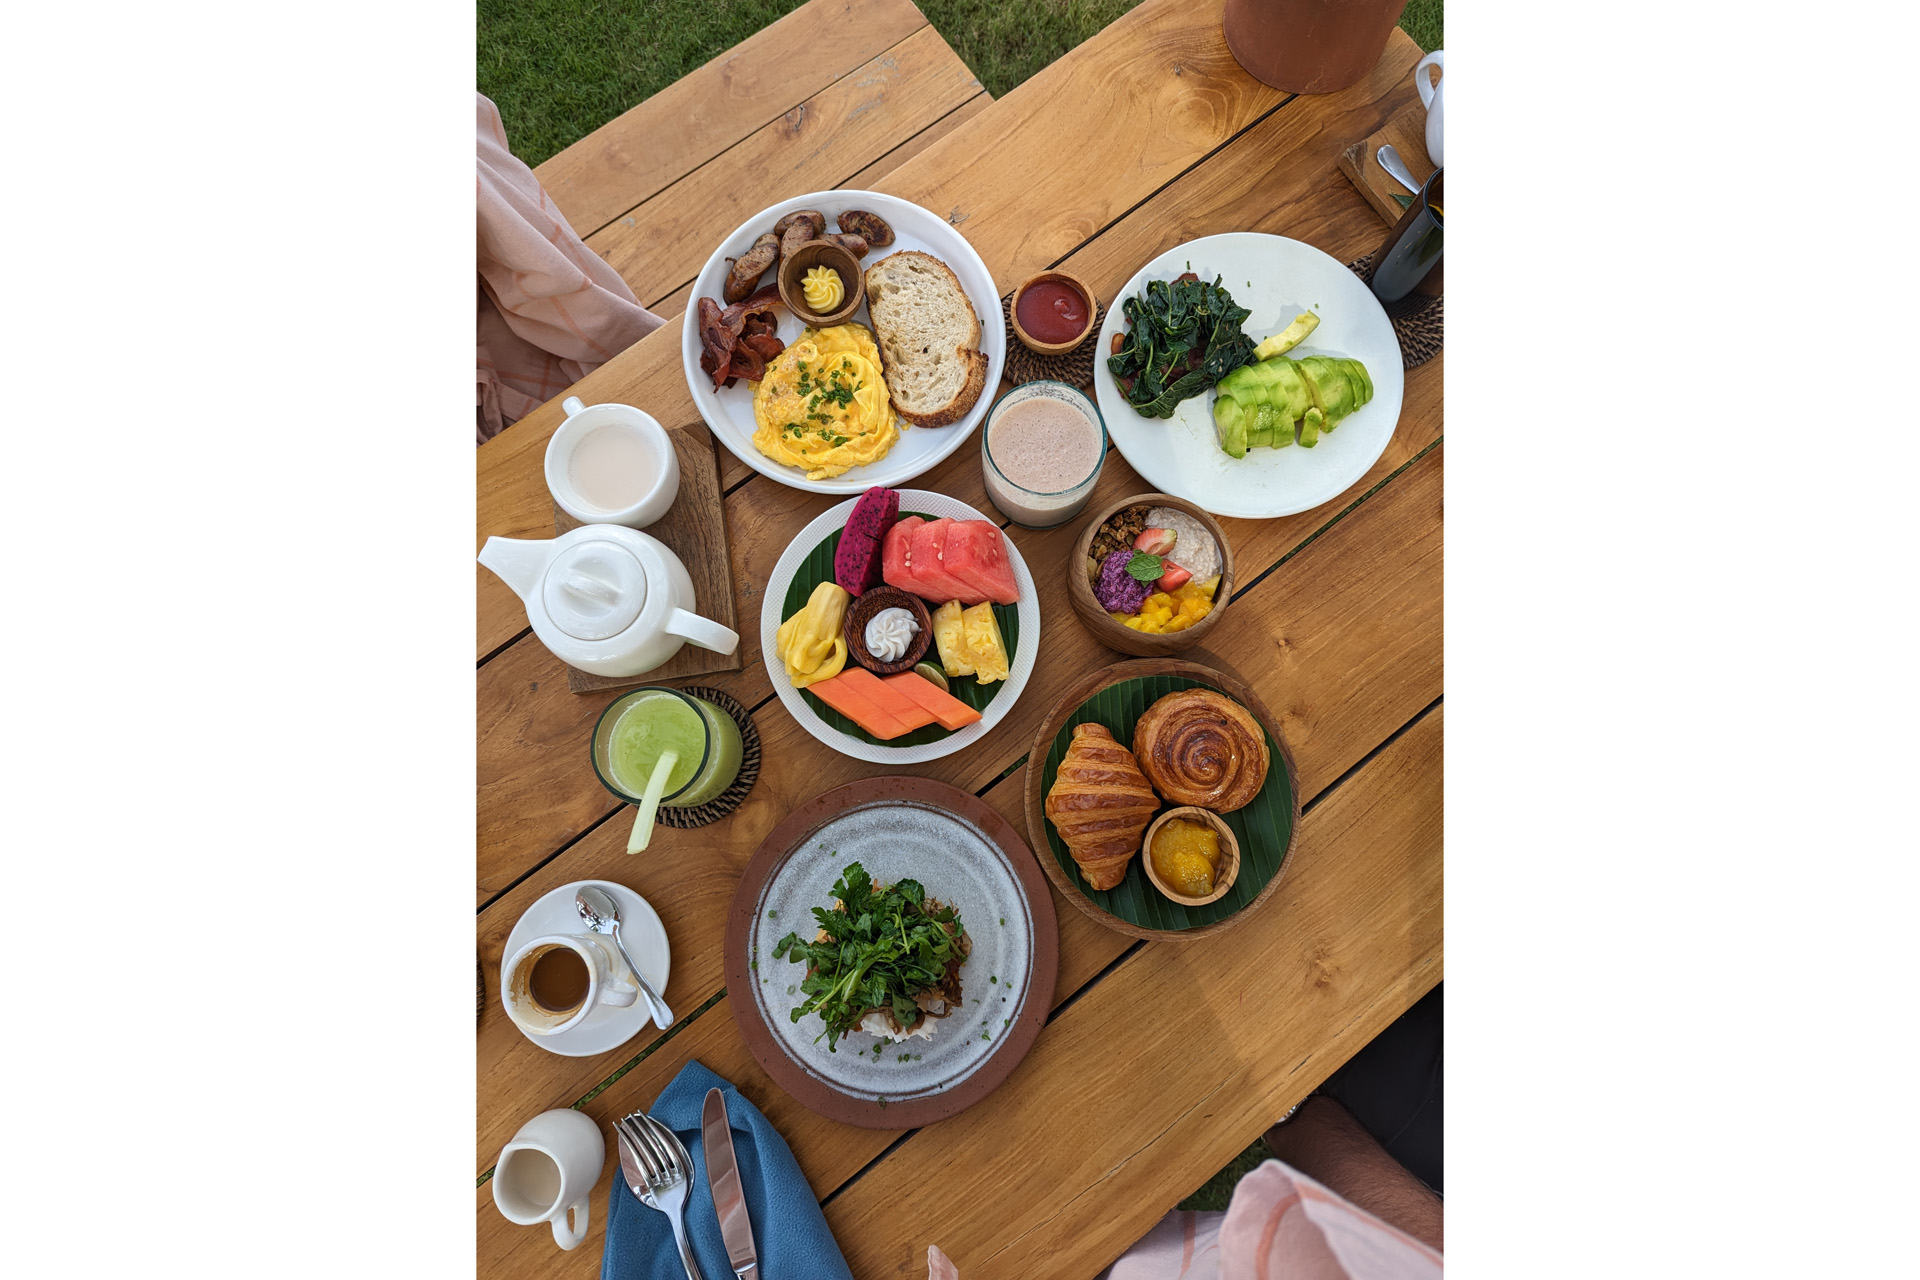 Breakfast dishes on a wooden table in Bali